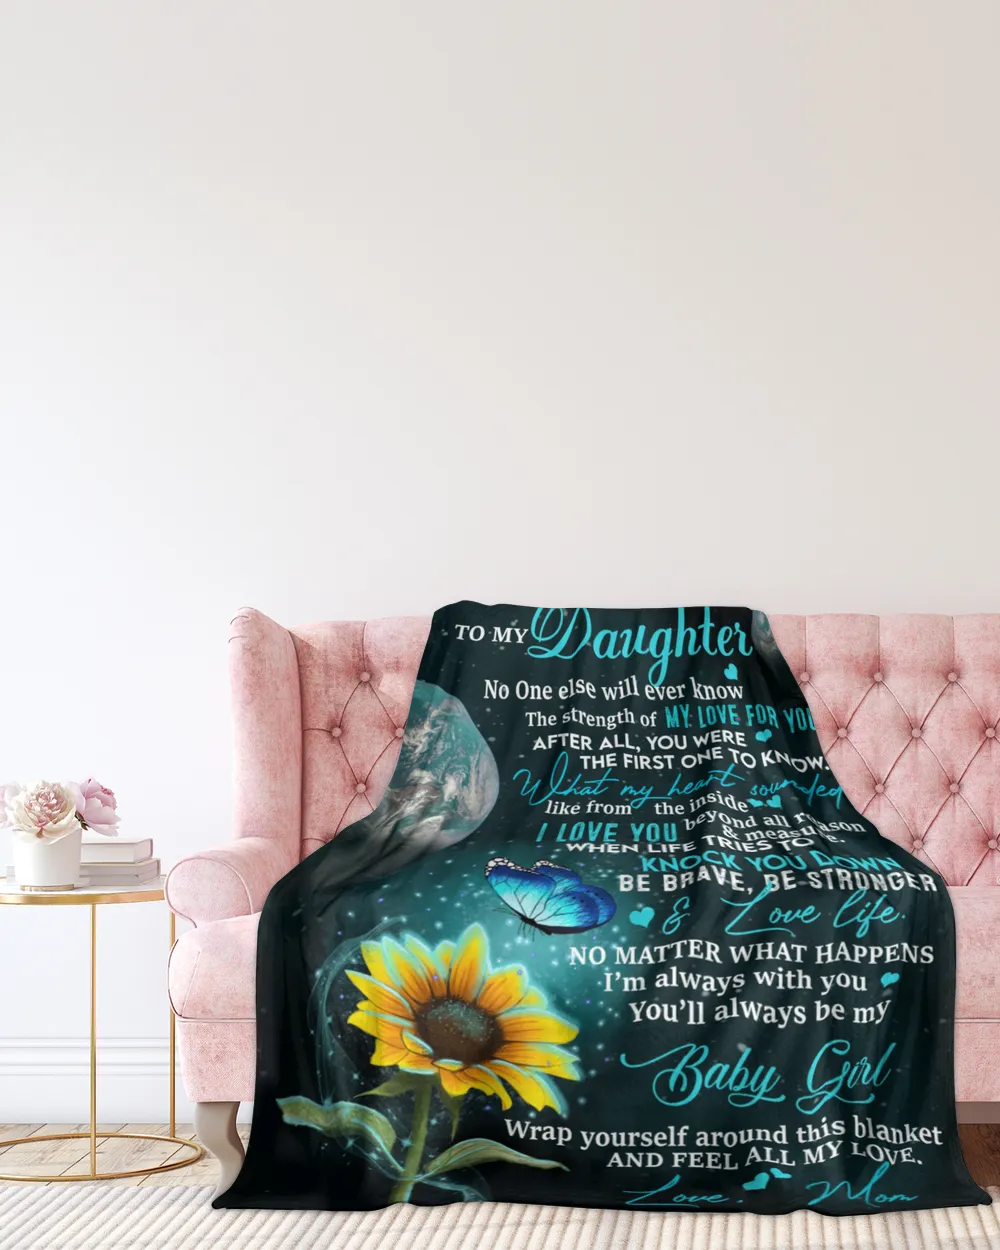 to my daughter no one else will ever know Quilt Fleece Blanket Bundle